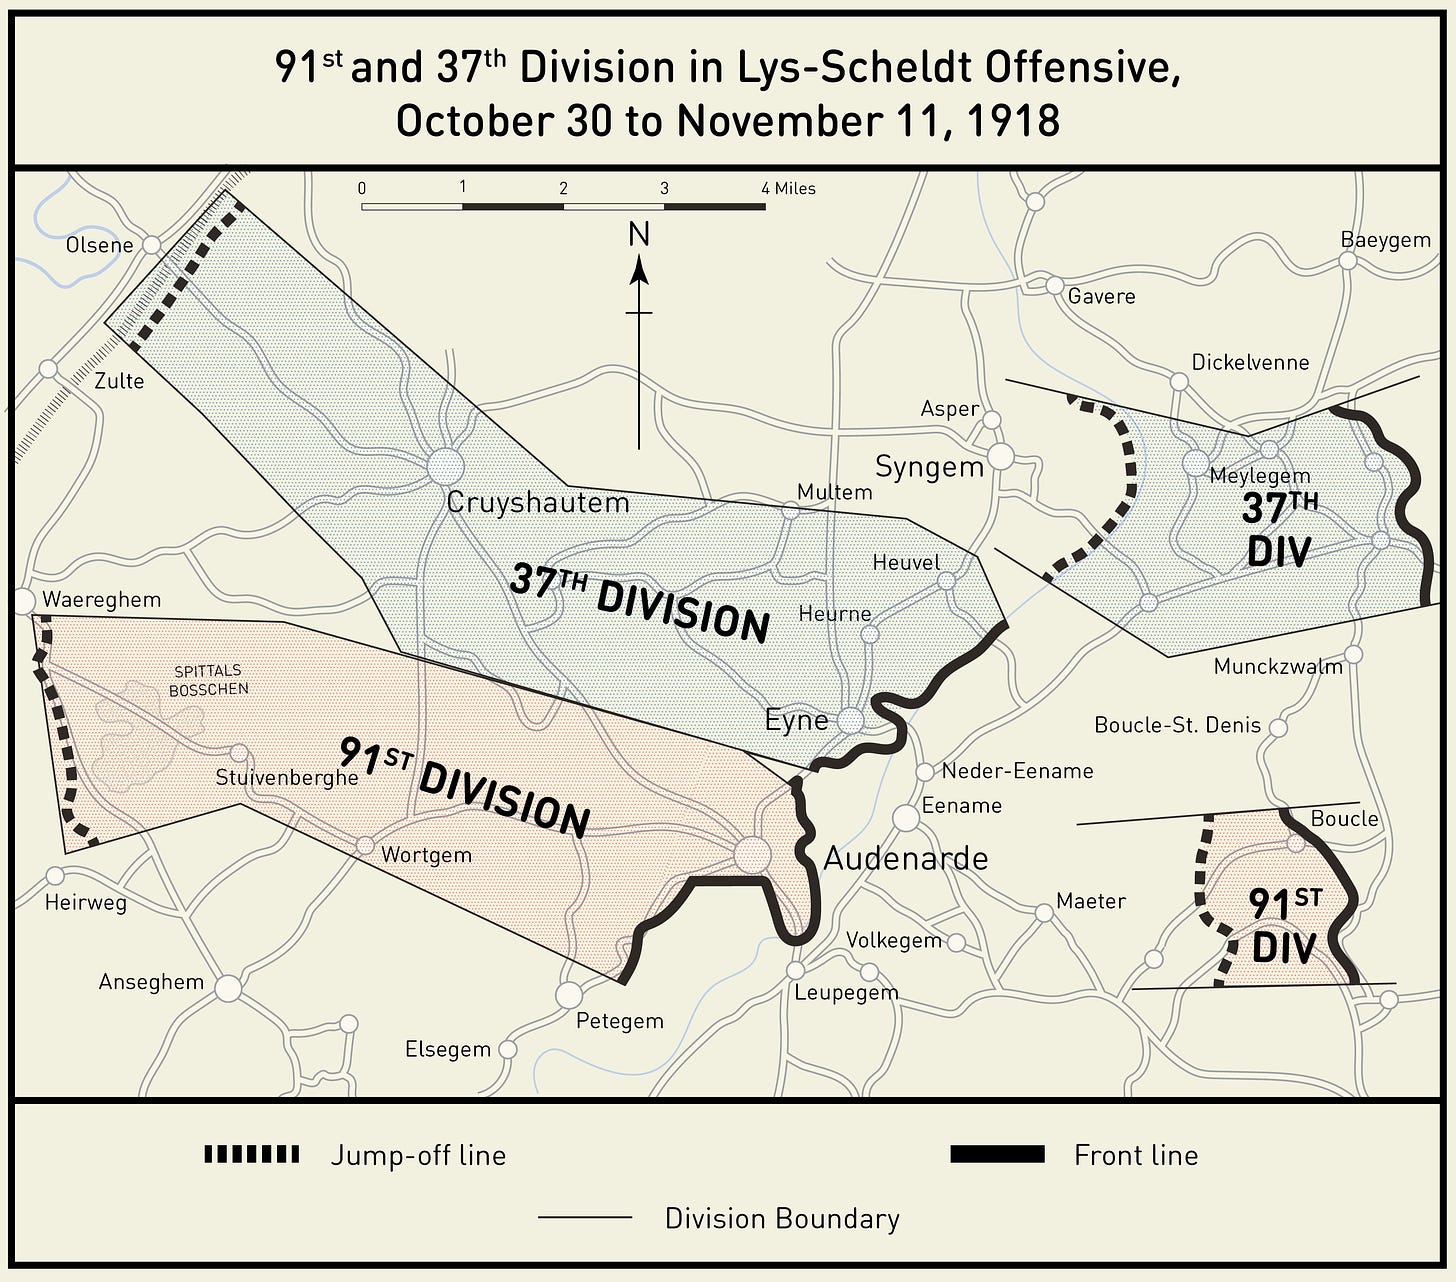 91st and 37th Divisions In Lys-Scheldt Offensive